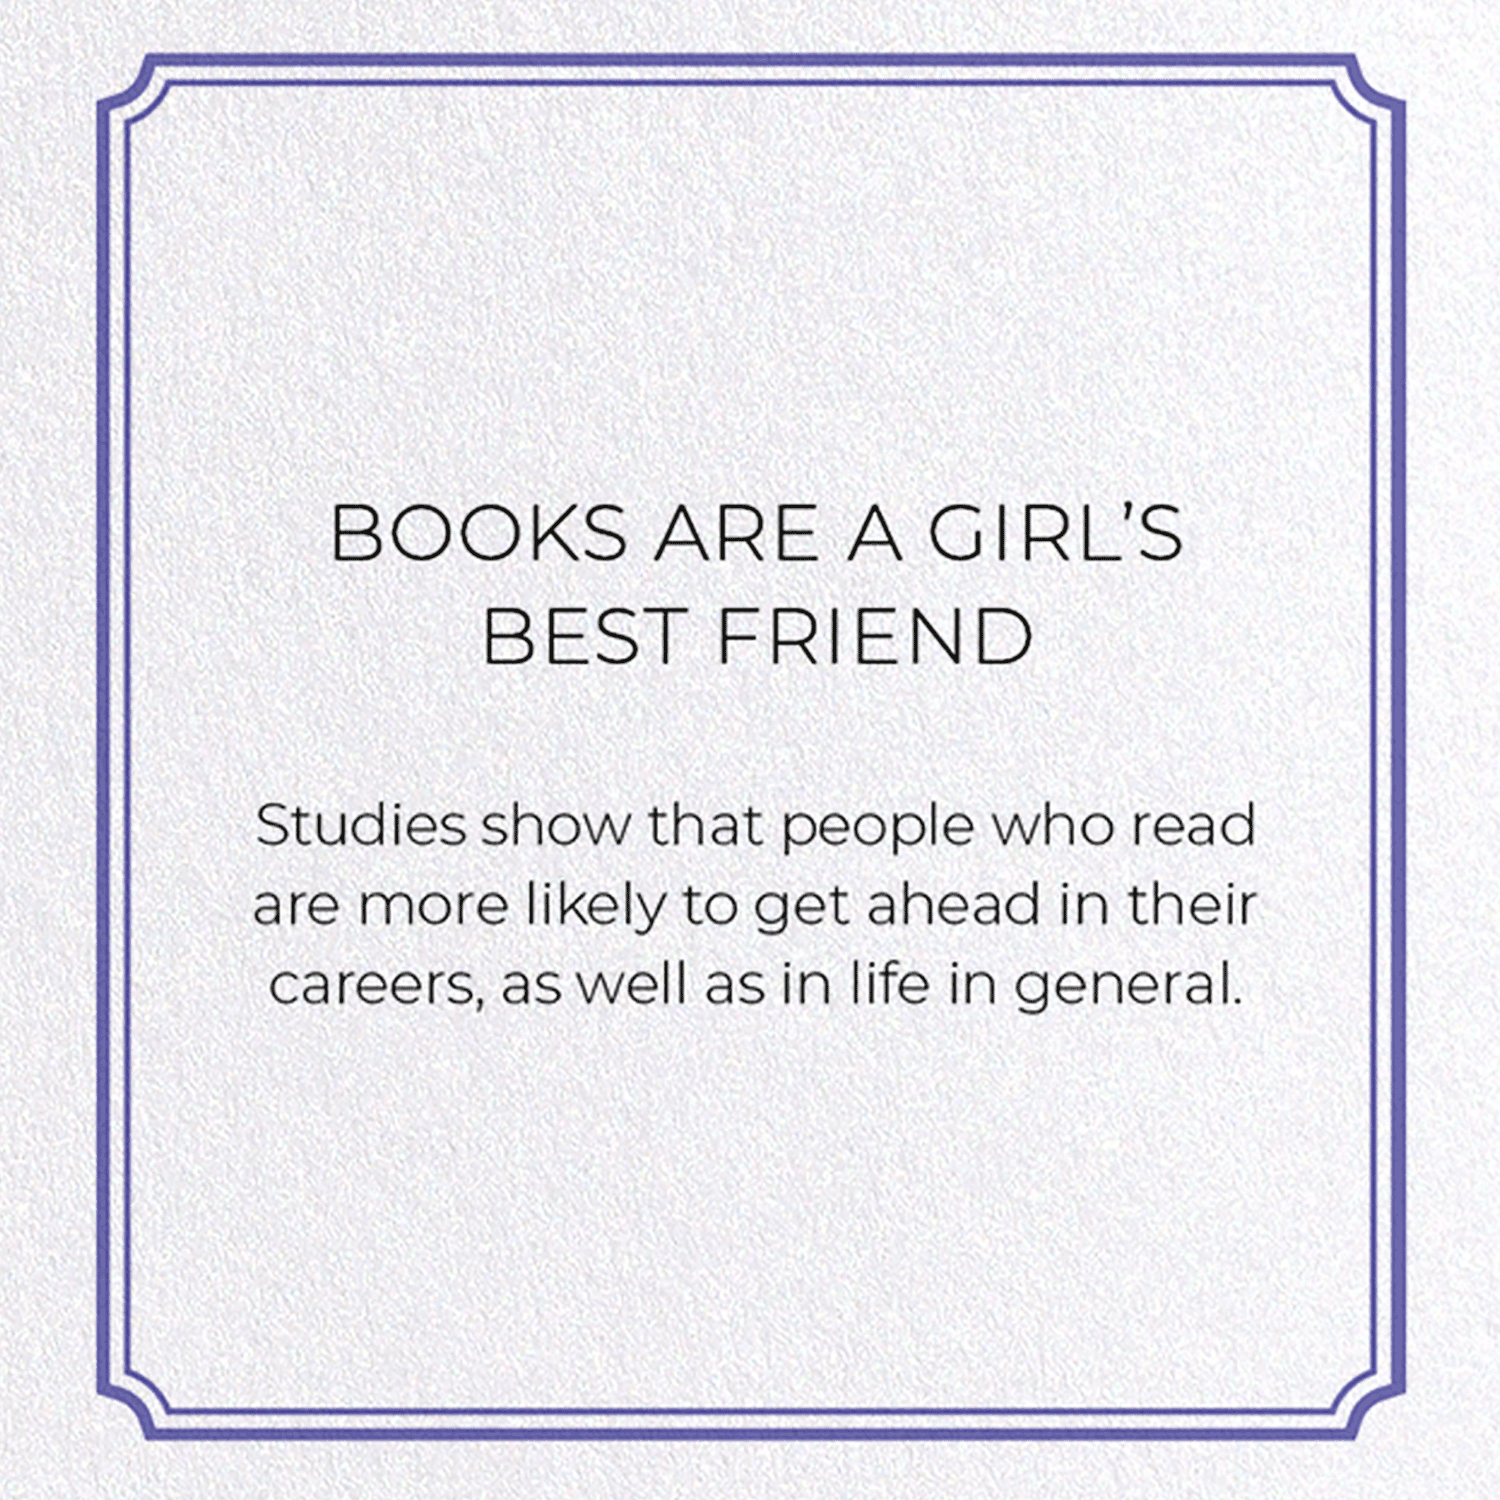 BOOKS ARE A GIRL’S BEST FRIEND